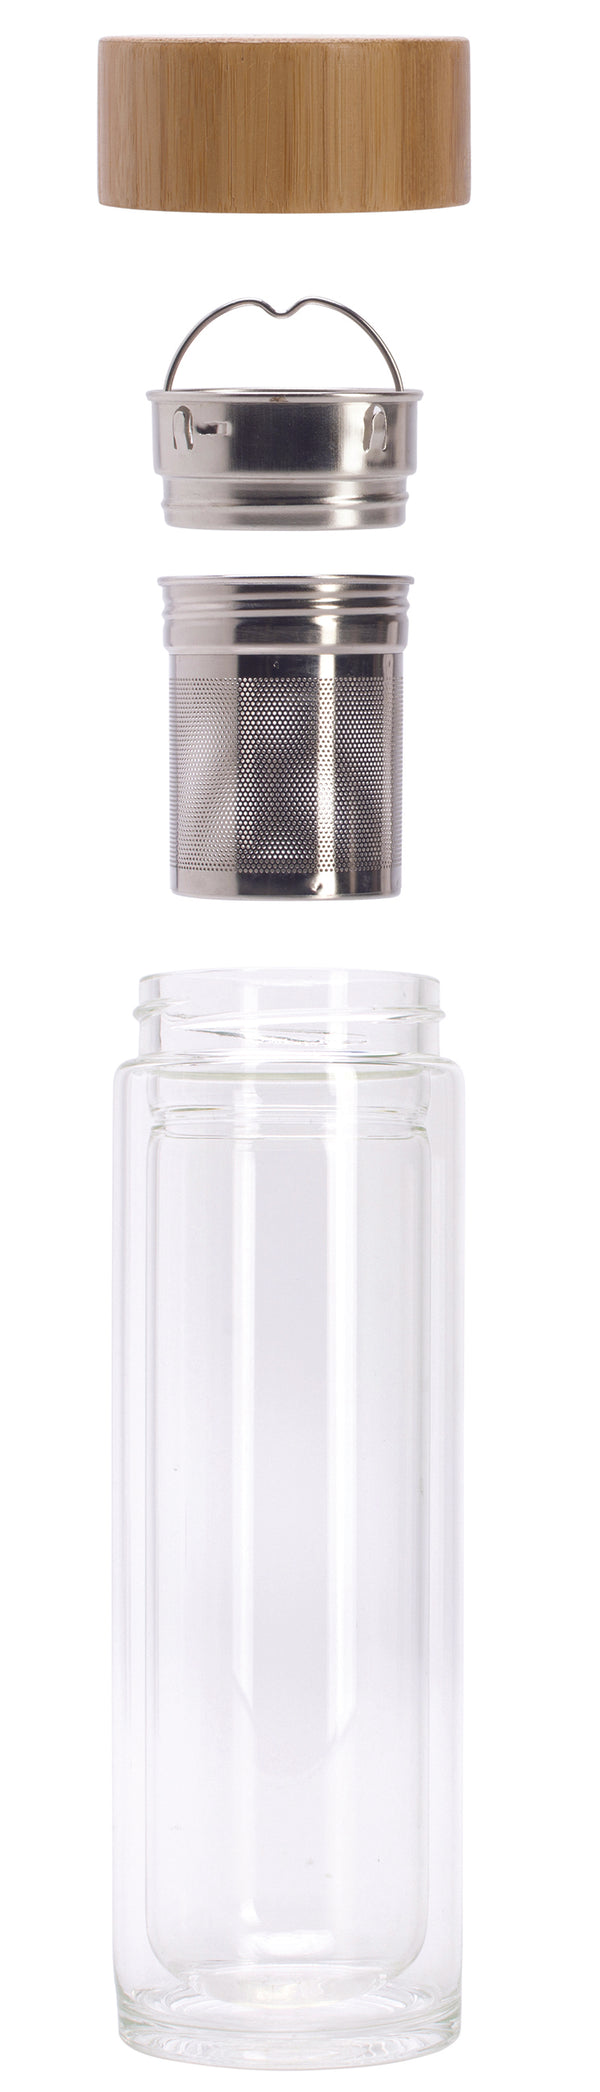 Double-Walled Thermo Glass Flask with filter